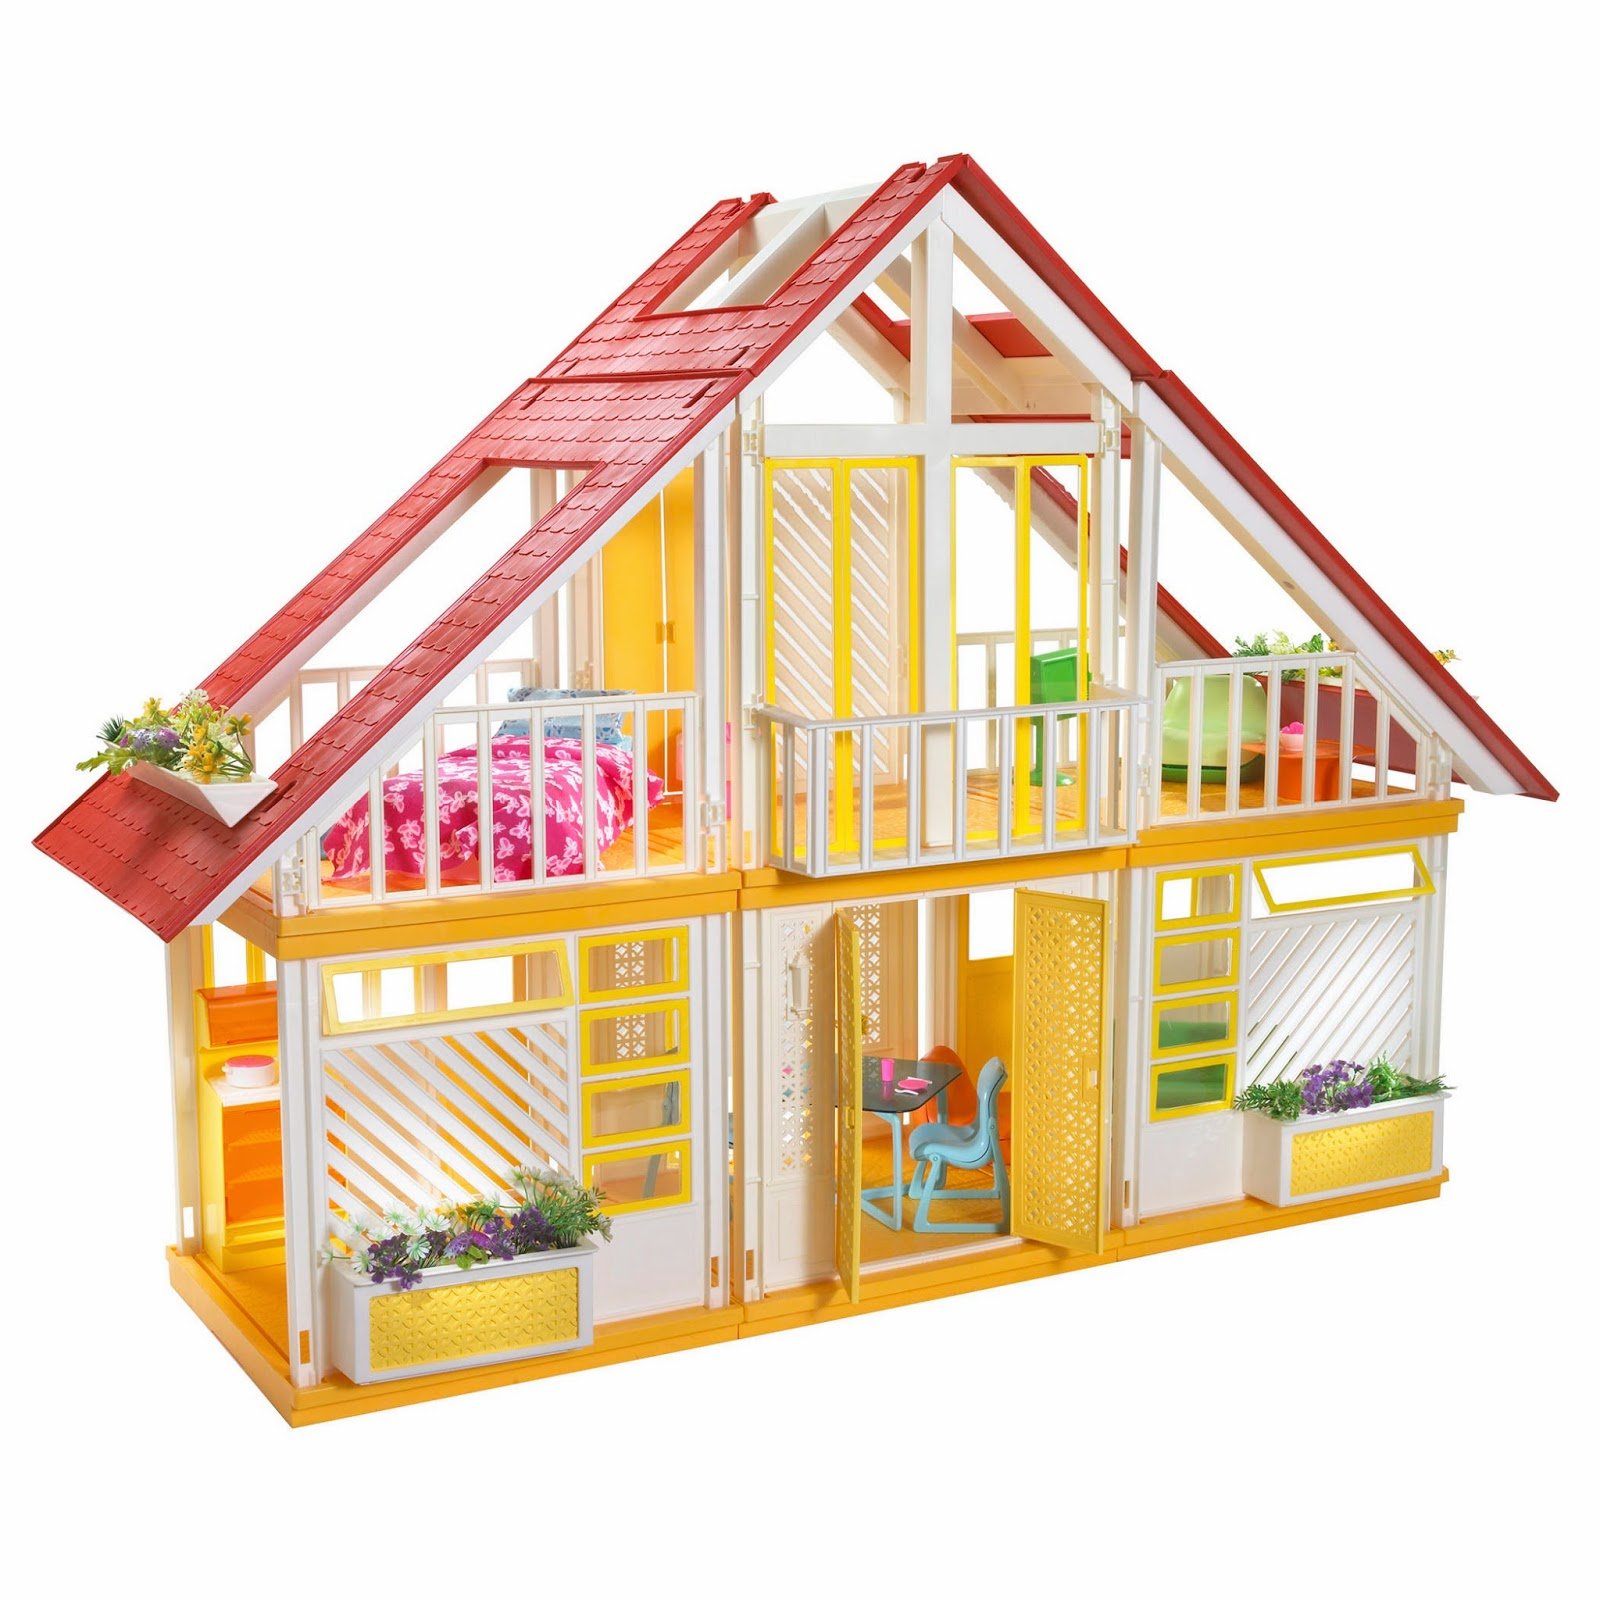 Barbie Dream House Pictures   Widescreen HD Wallpapers 1600x1600